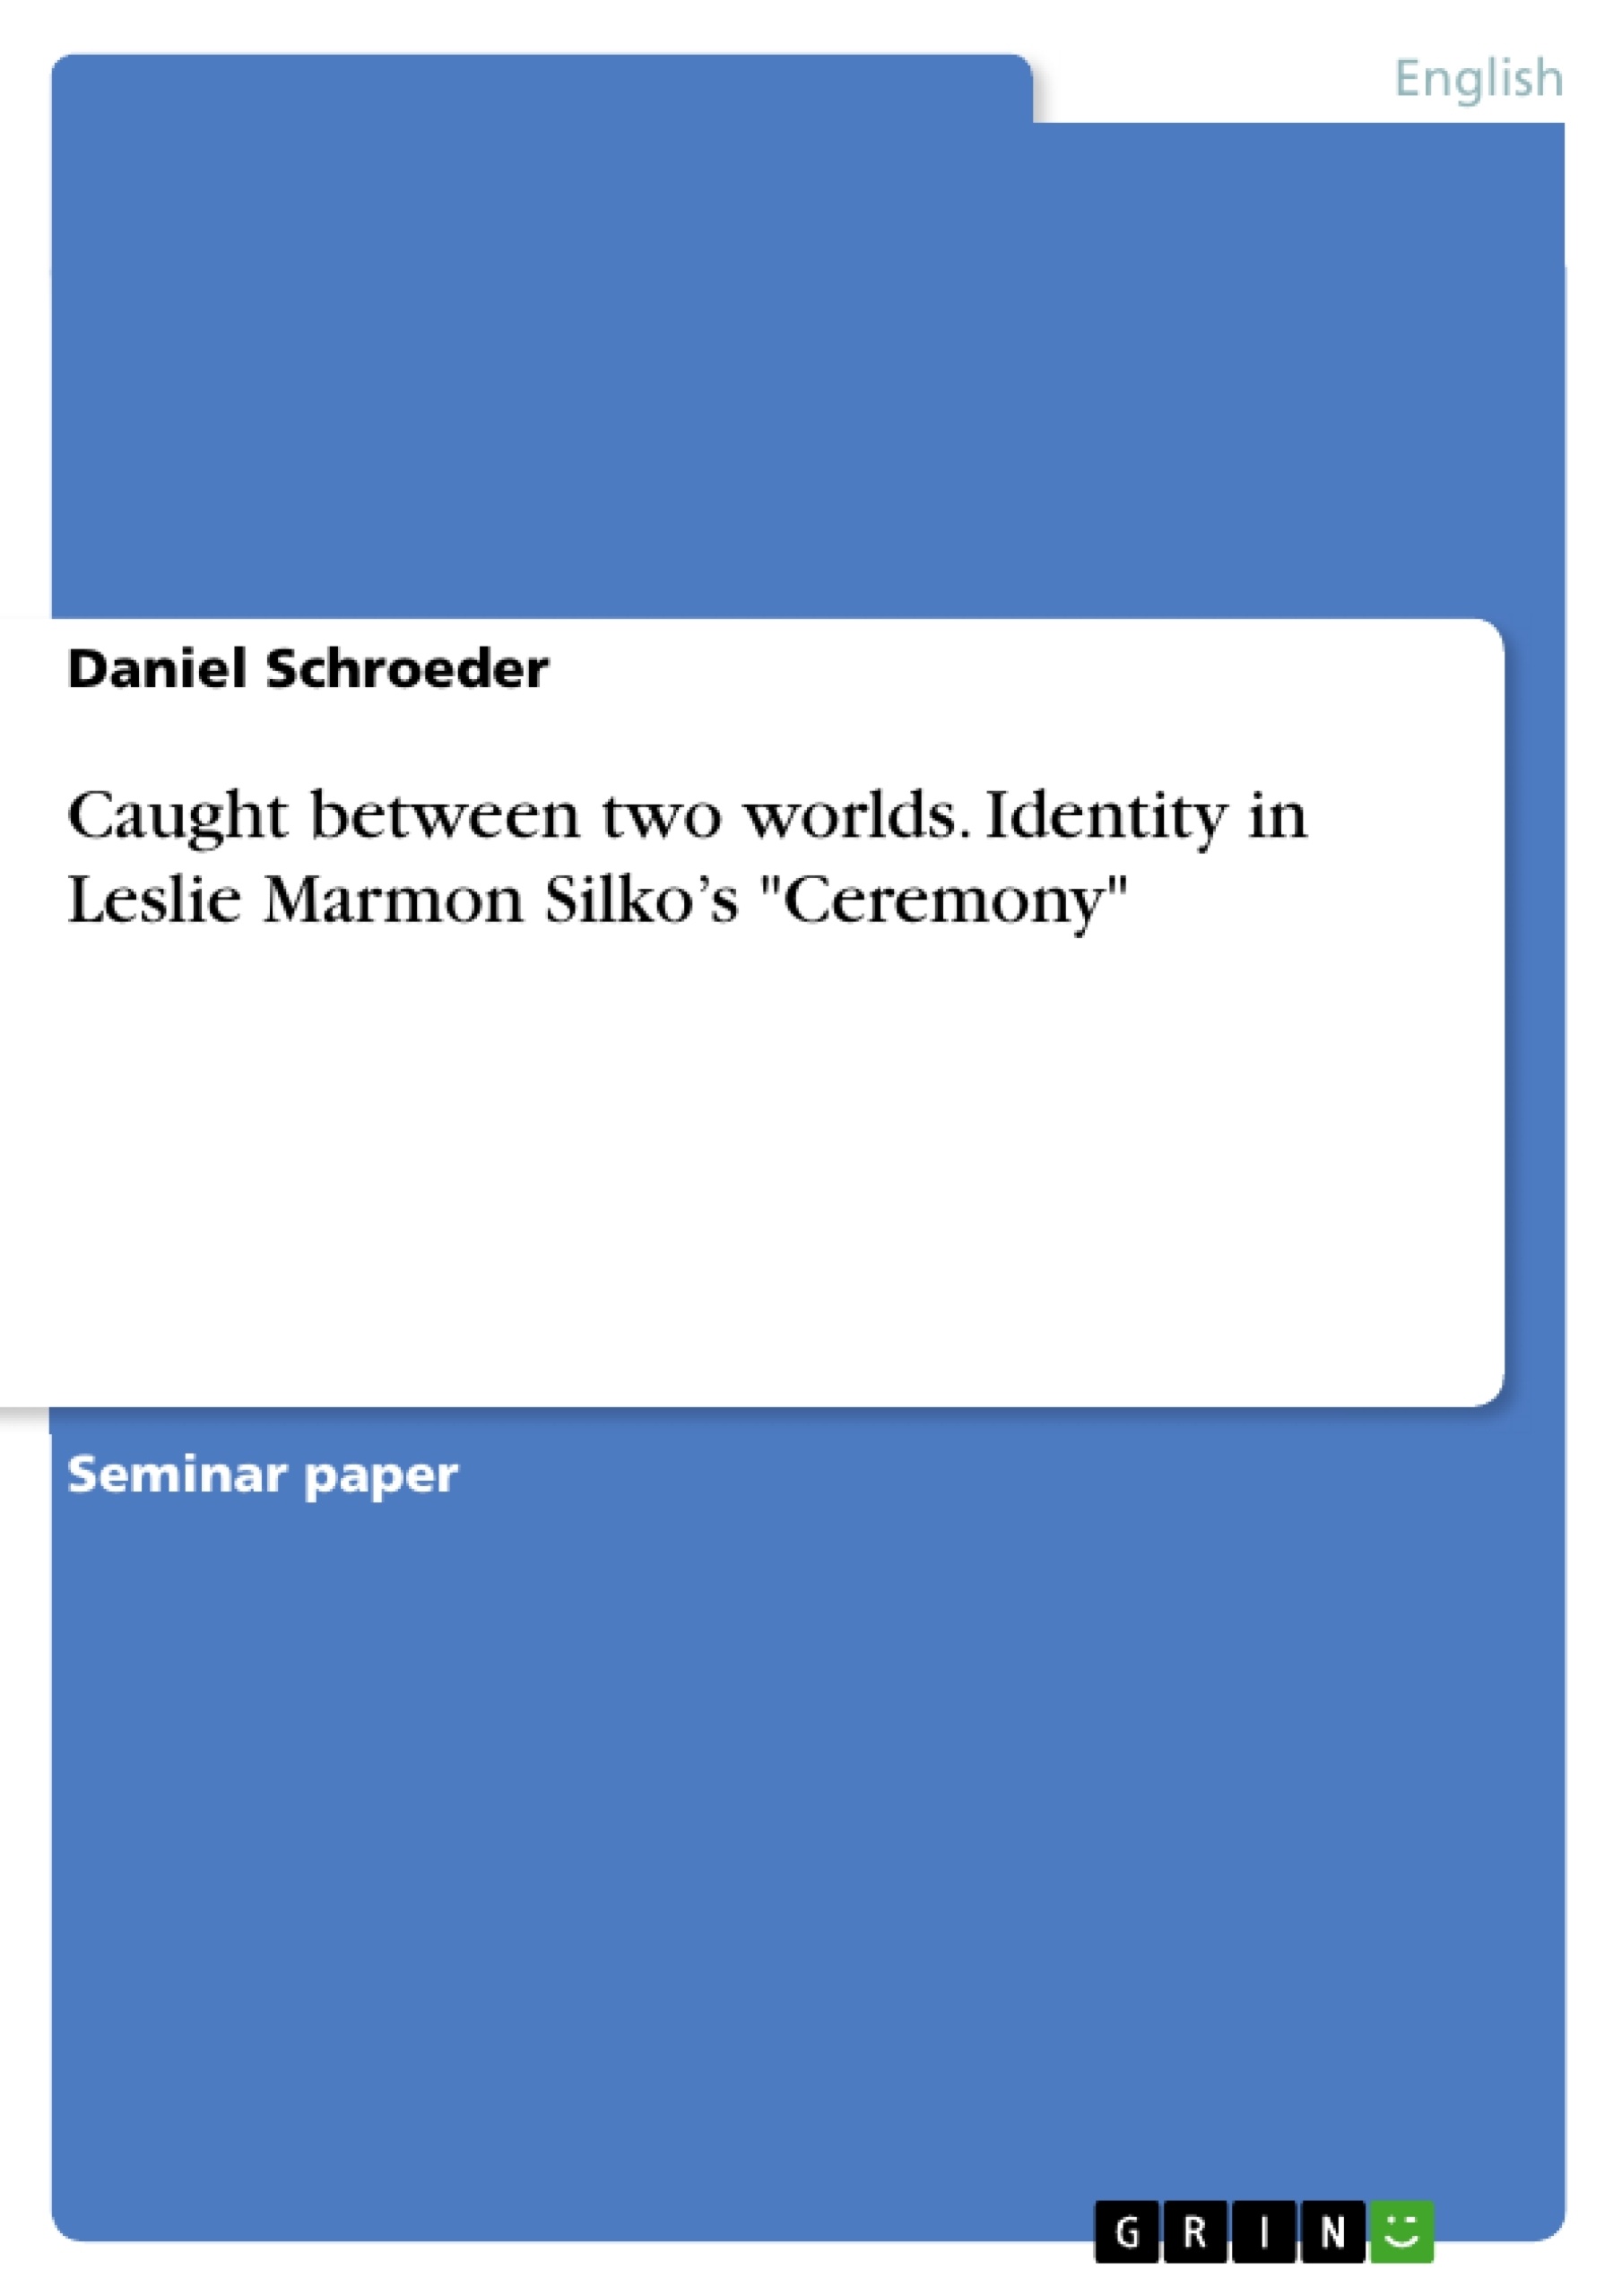 Título: Caught between two worlds. Identity in Leslie Marmon Silko’s "Ceremony"